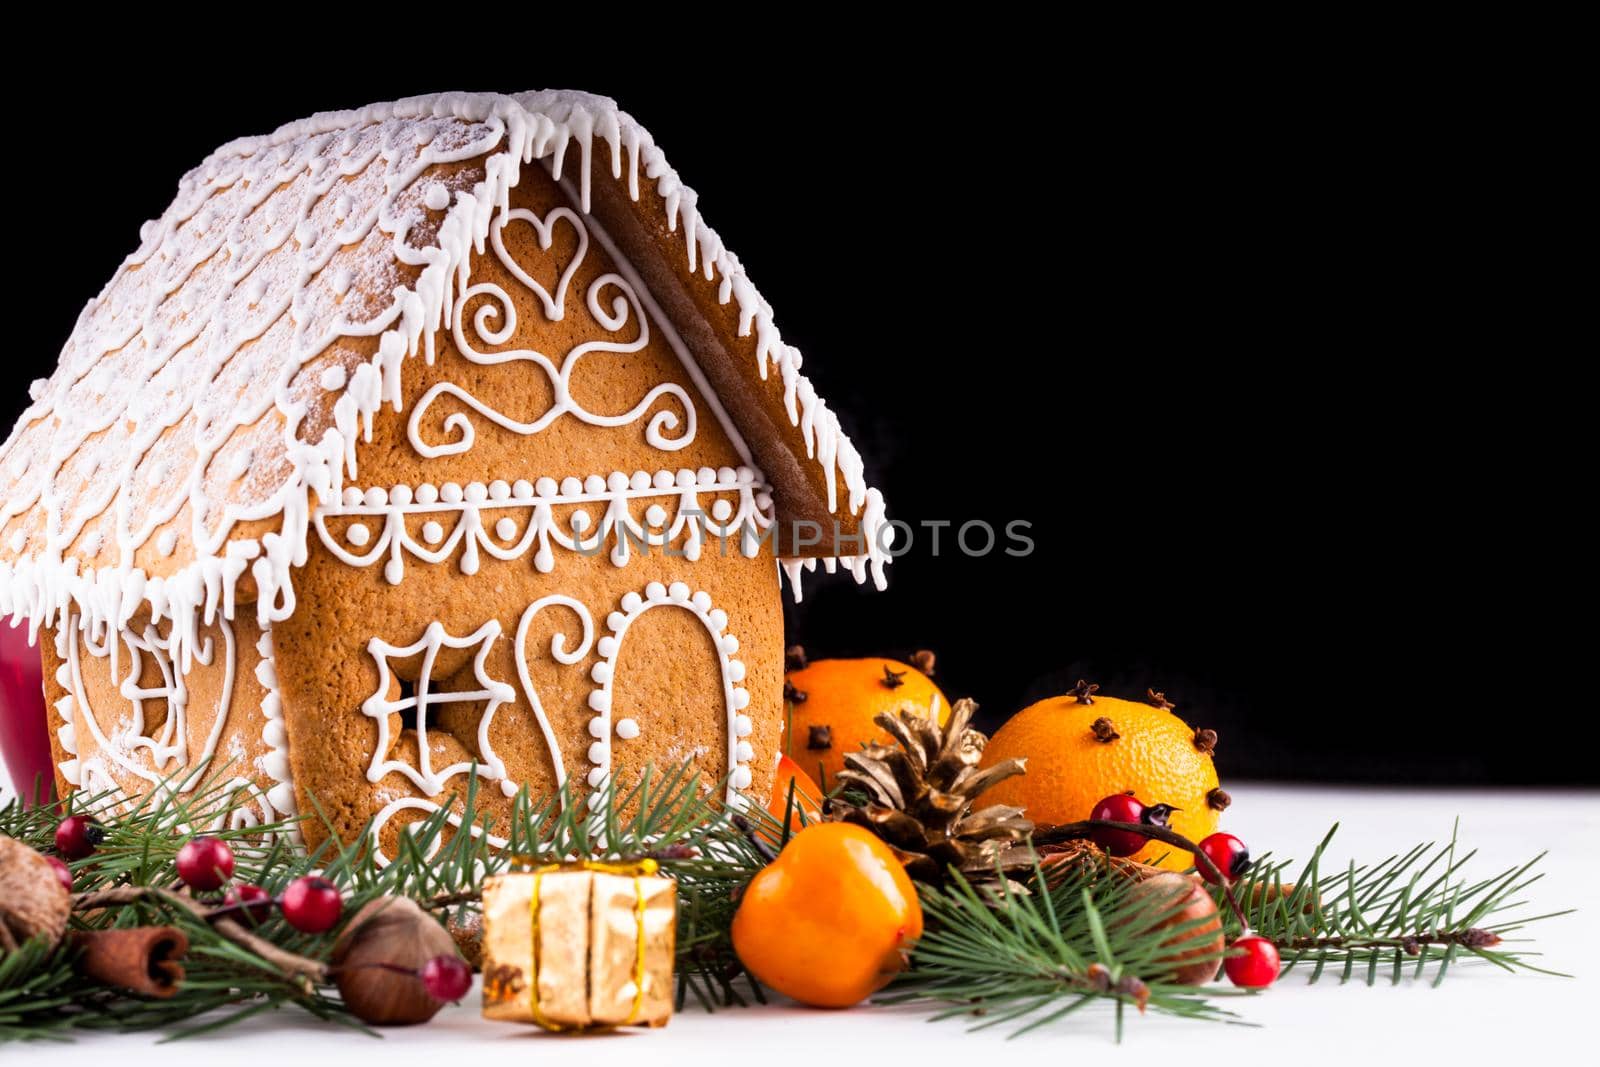 gingerbread house with christmas decorations on a white backgrond